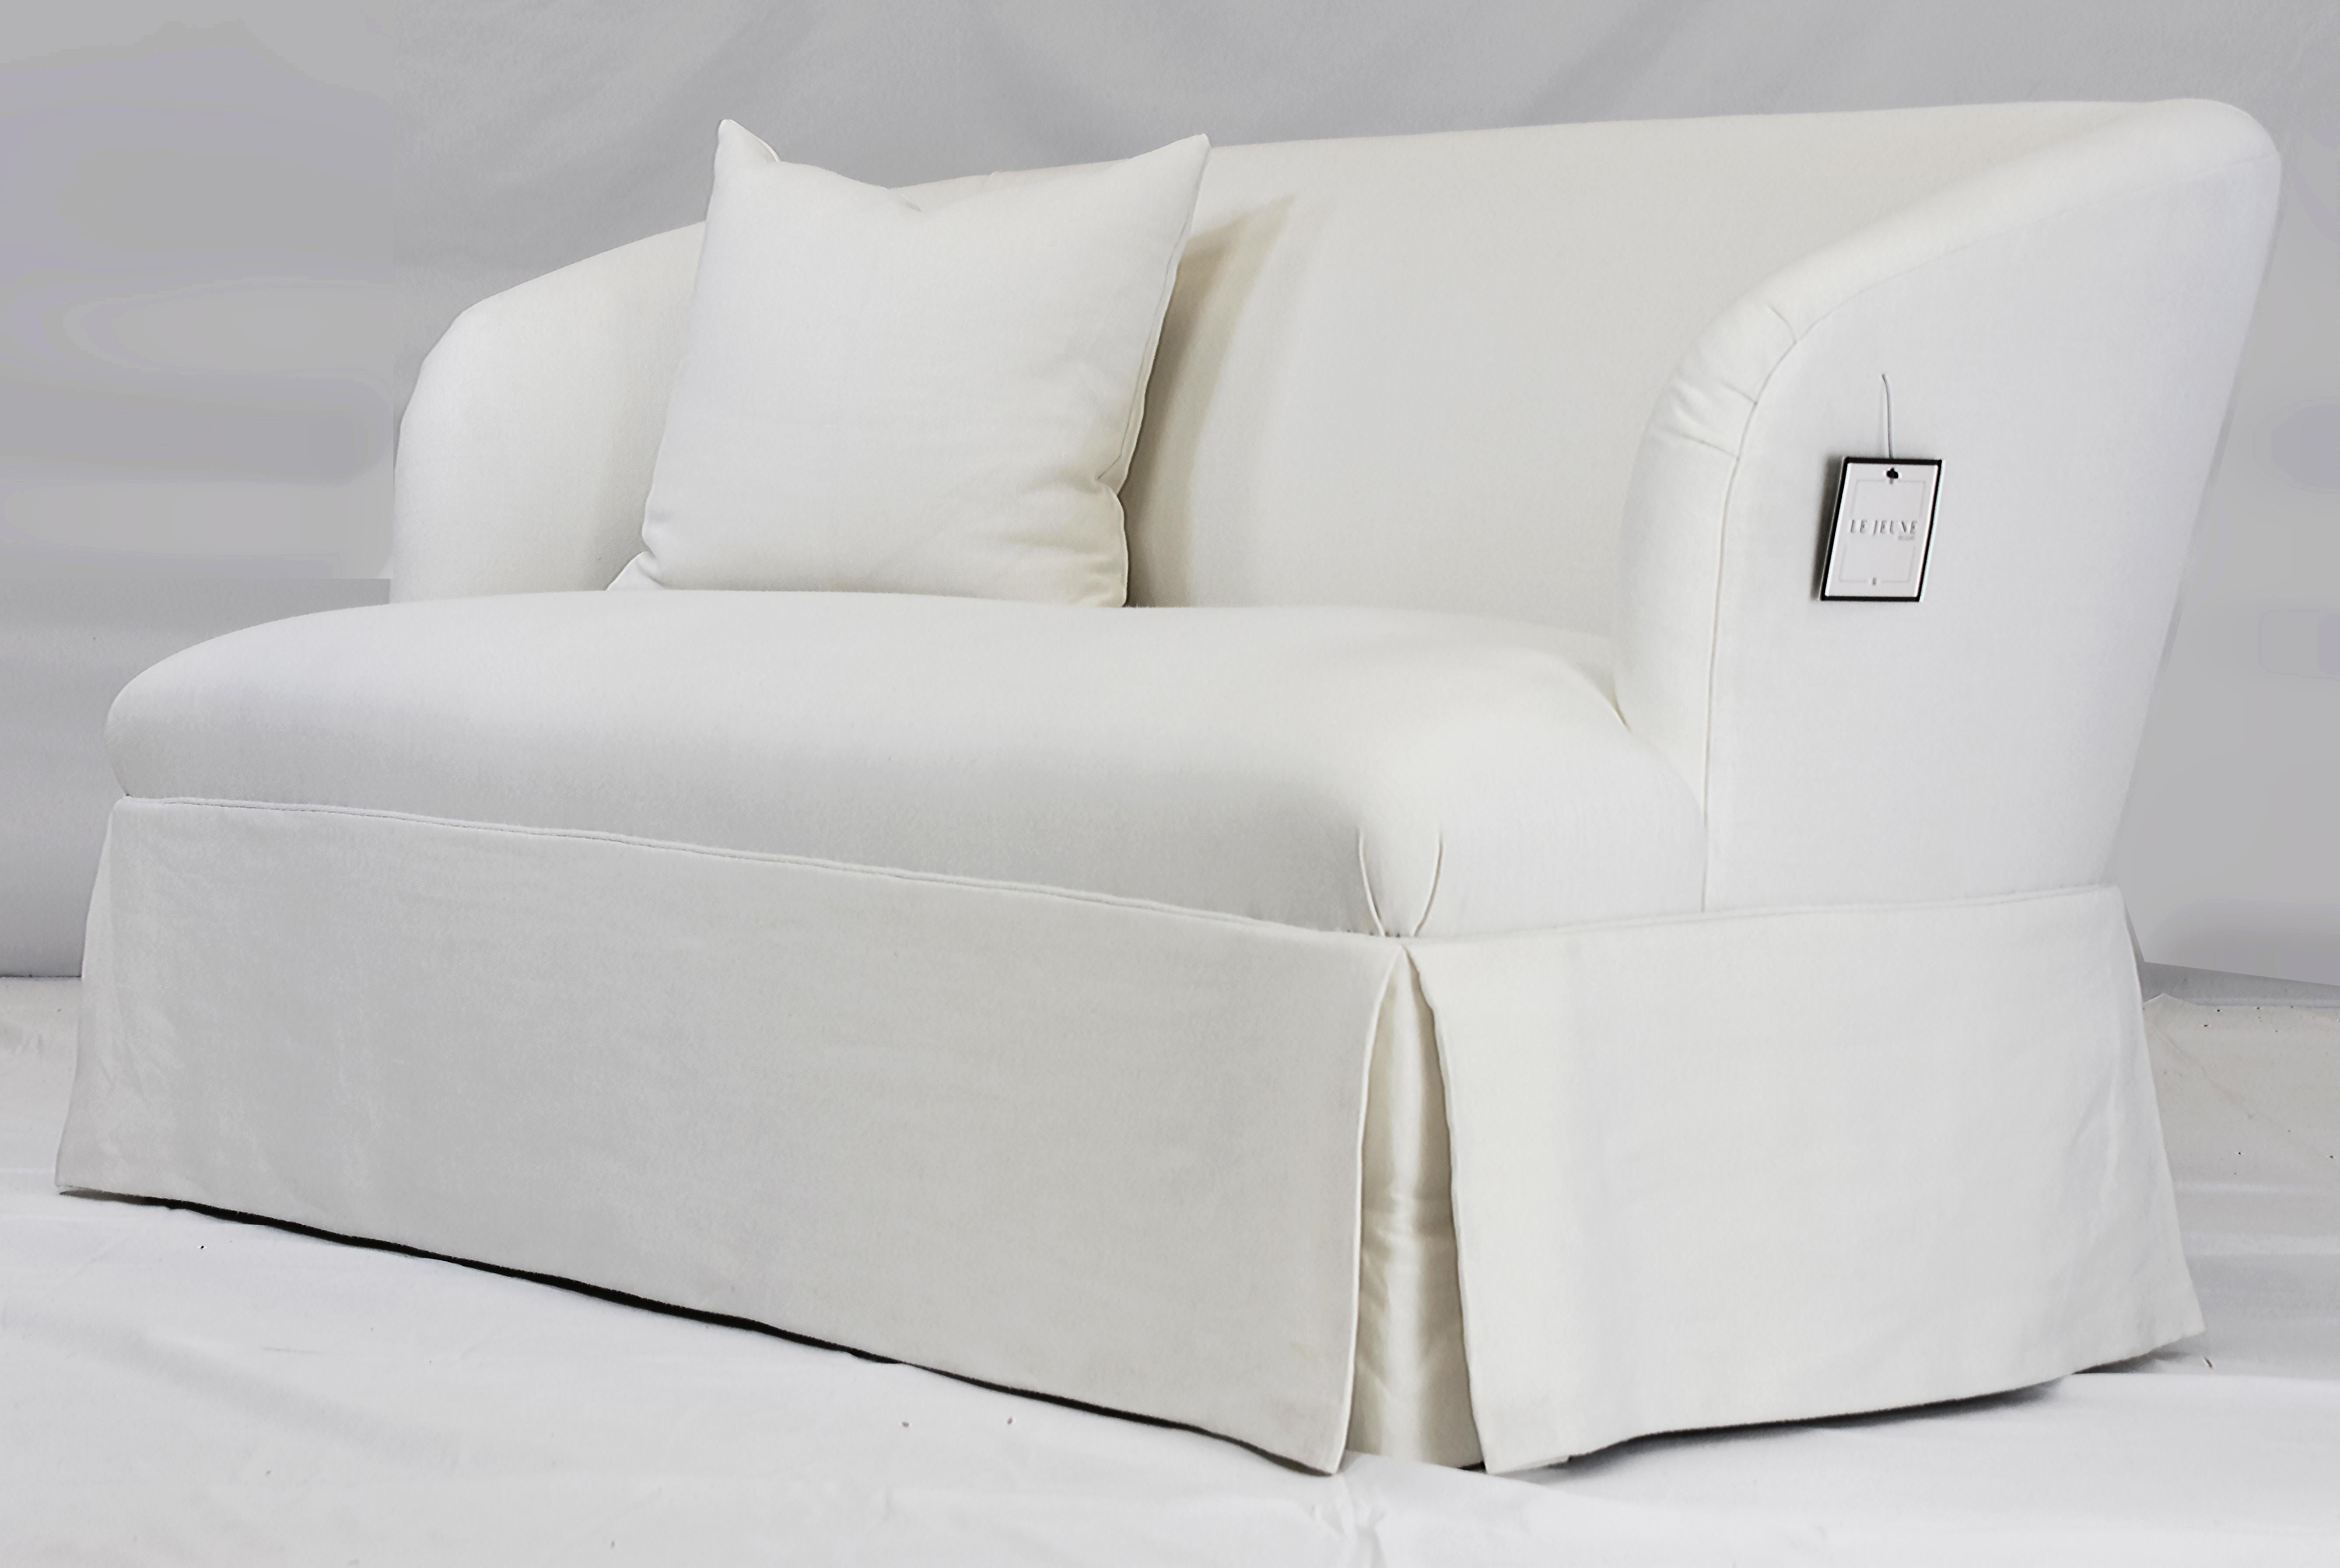 Le Jeune Upholstery St Tropez 2-Seat Sofa Showroom Model

Offered for sale is a Le Jeune Upholstery ST. TROPEZ 2 seat sofa floor model. The sofa is scaled for small to medium-sized rooms with soft curved edges on the seat and back corners of the